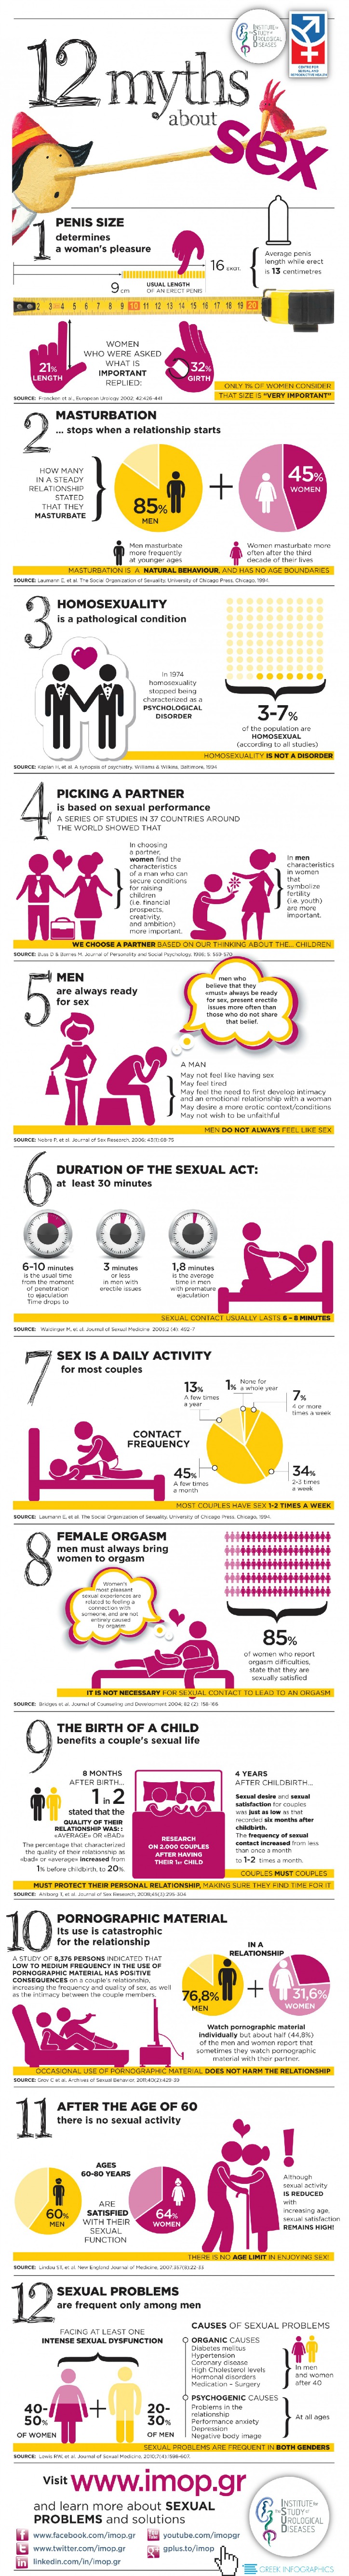 12 Of The Most Common Sex Myths Debunked Infographic The Trent 